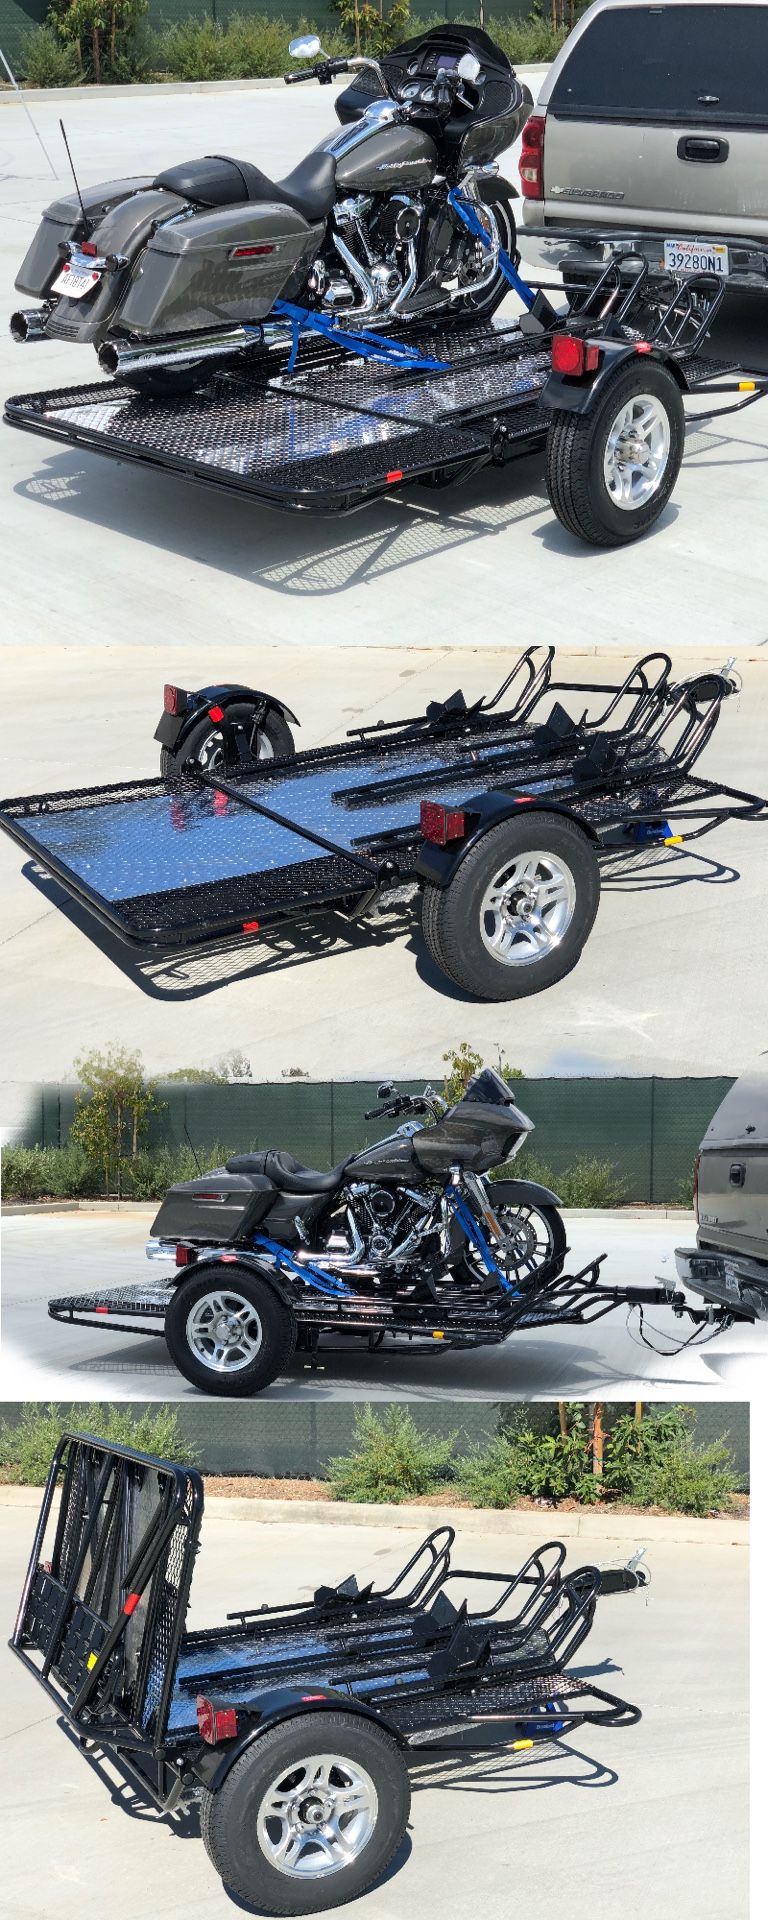 Motorcycle trailer - Folds for storage - 2000lb Capacity